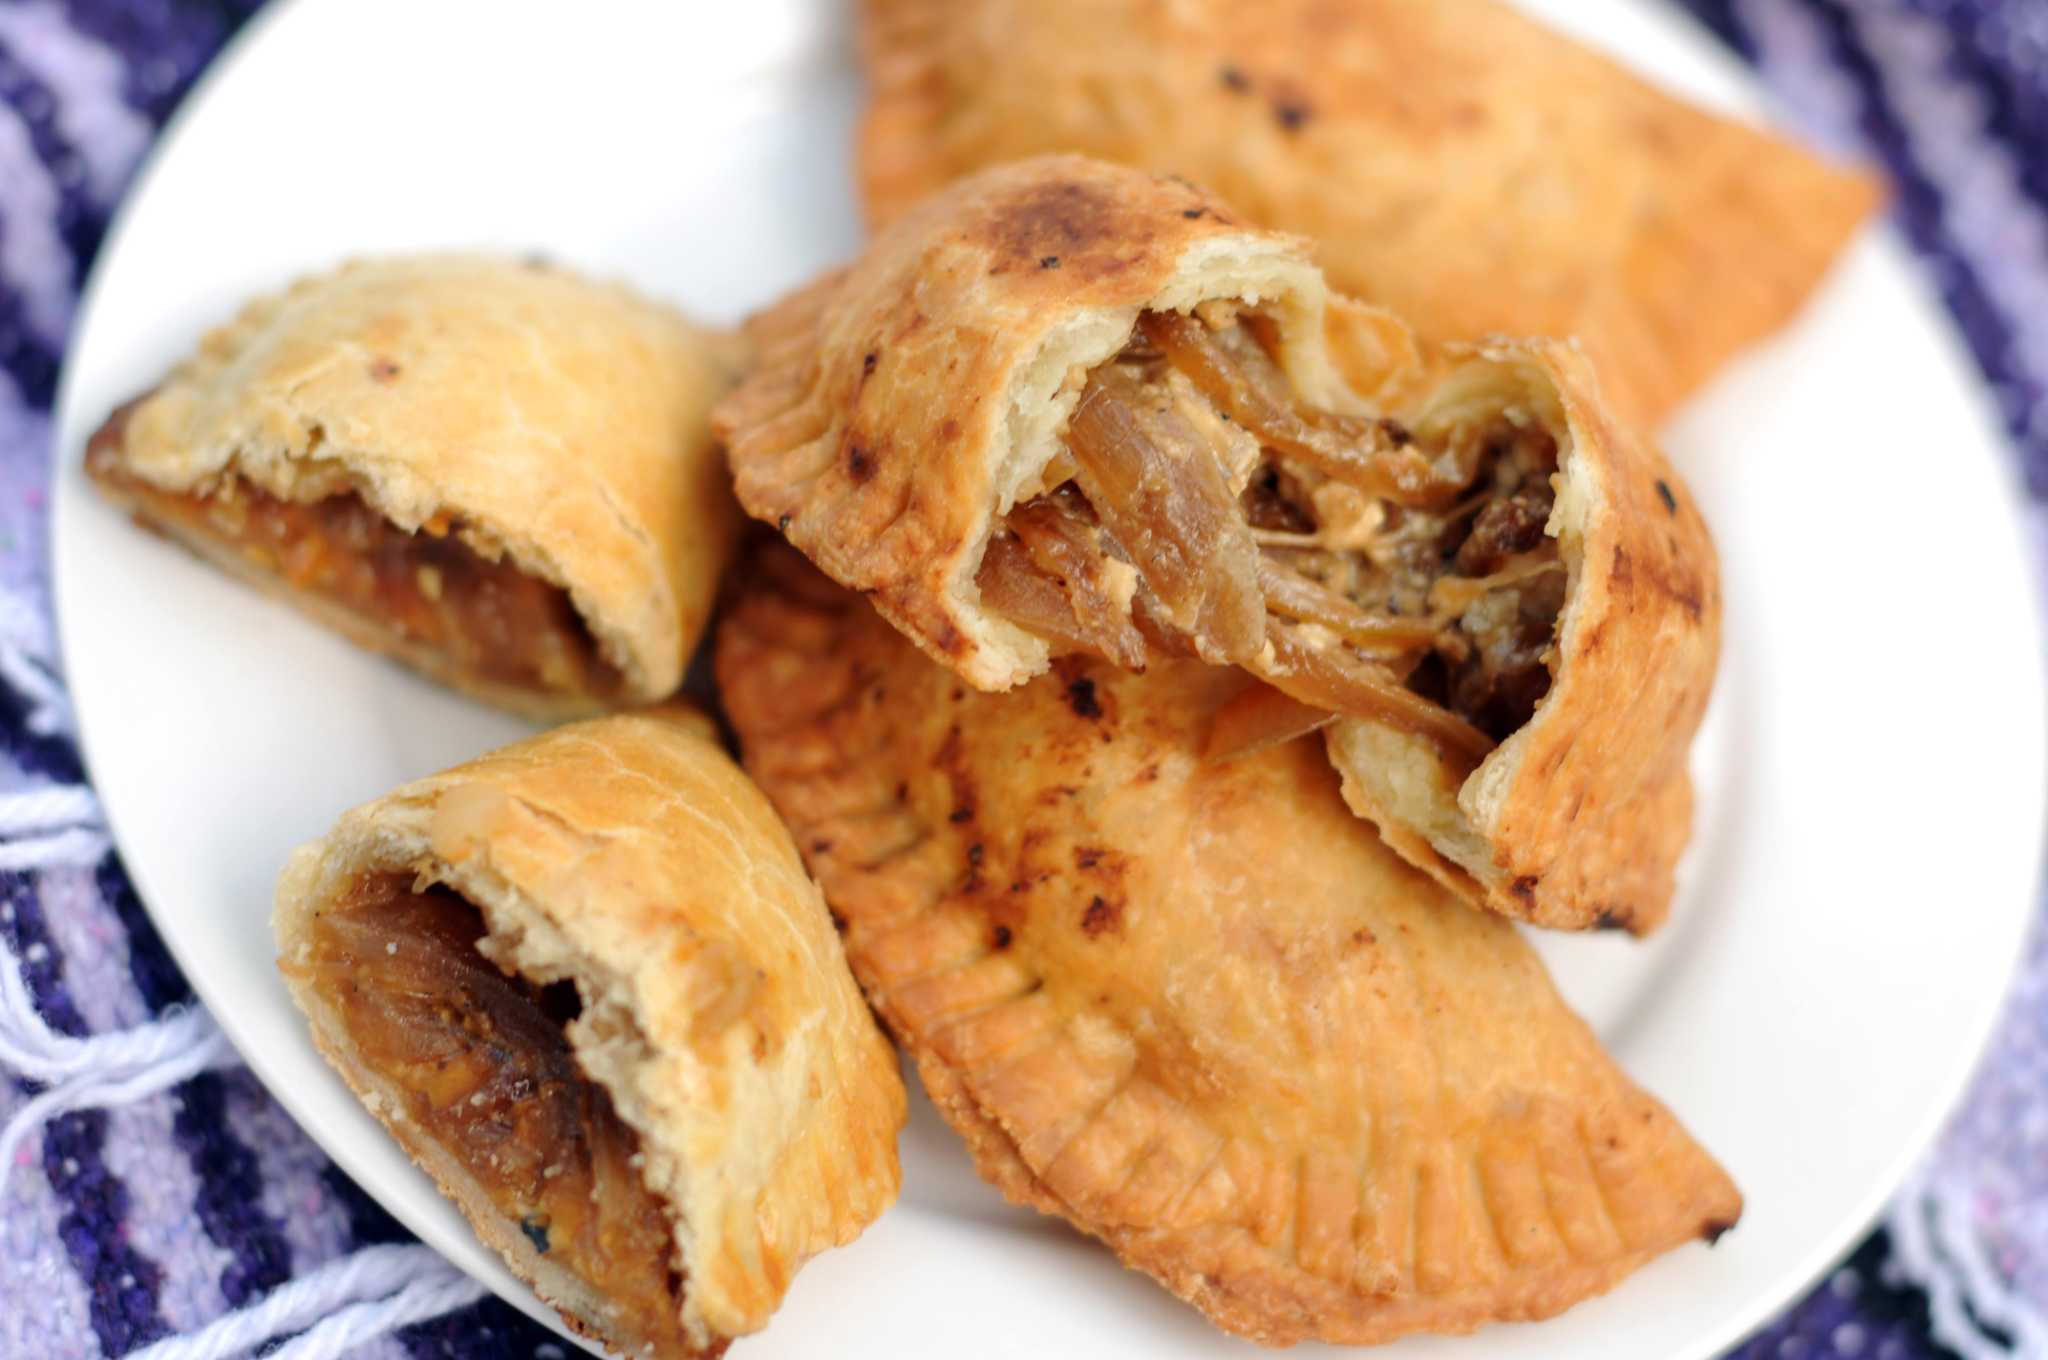 Empanadas stuffed with blue cheese and caramelized onions are a unique form of empanada popular in Argentina.